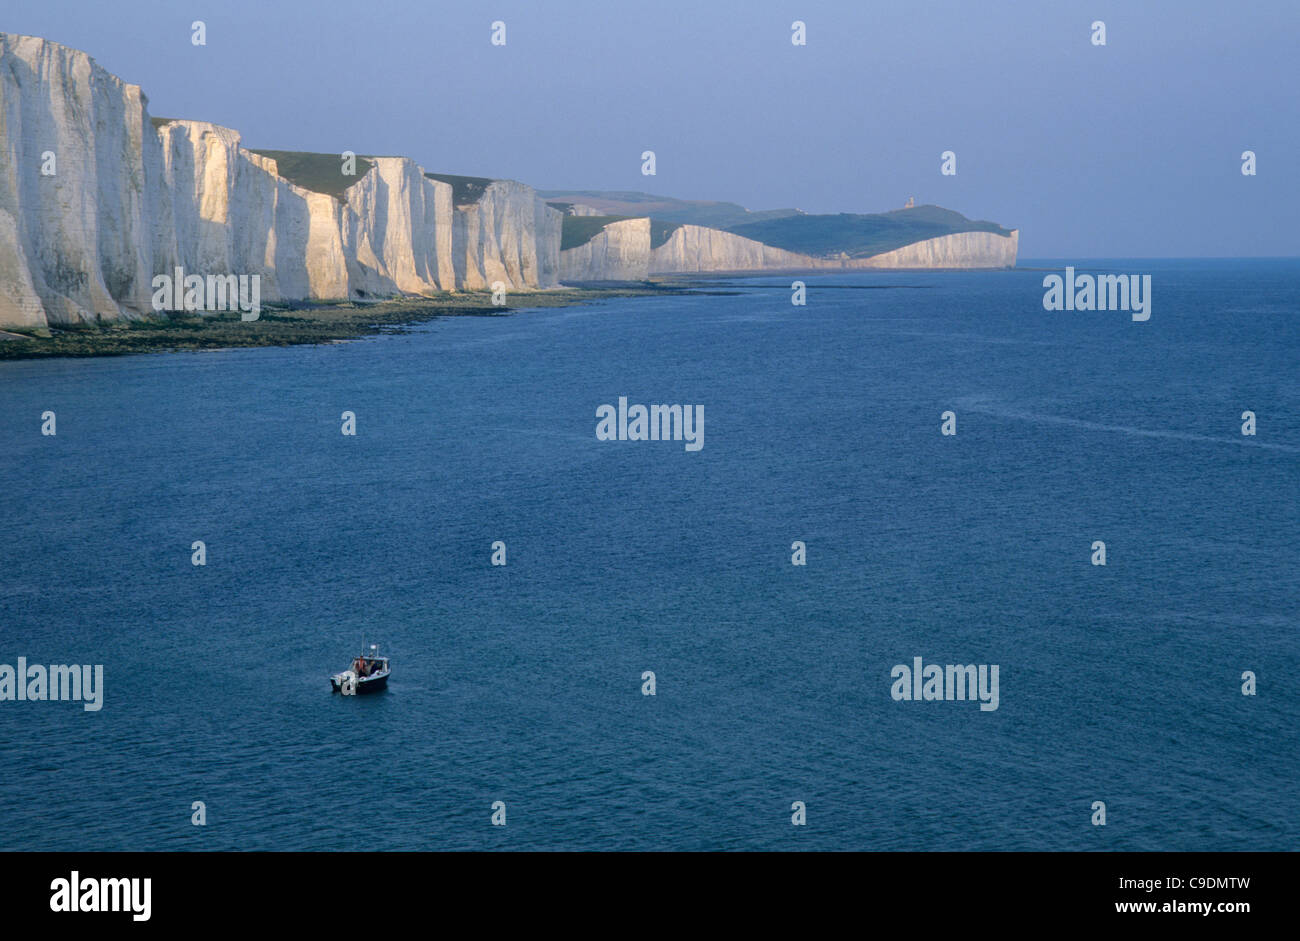 A lone motor boat under the cliffs of the Seven Sisters near Eastbounre, East Sussex, England. Stock Photo